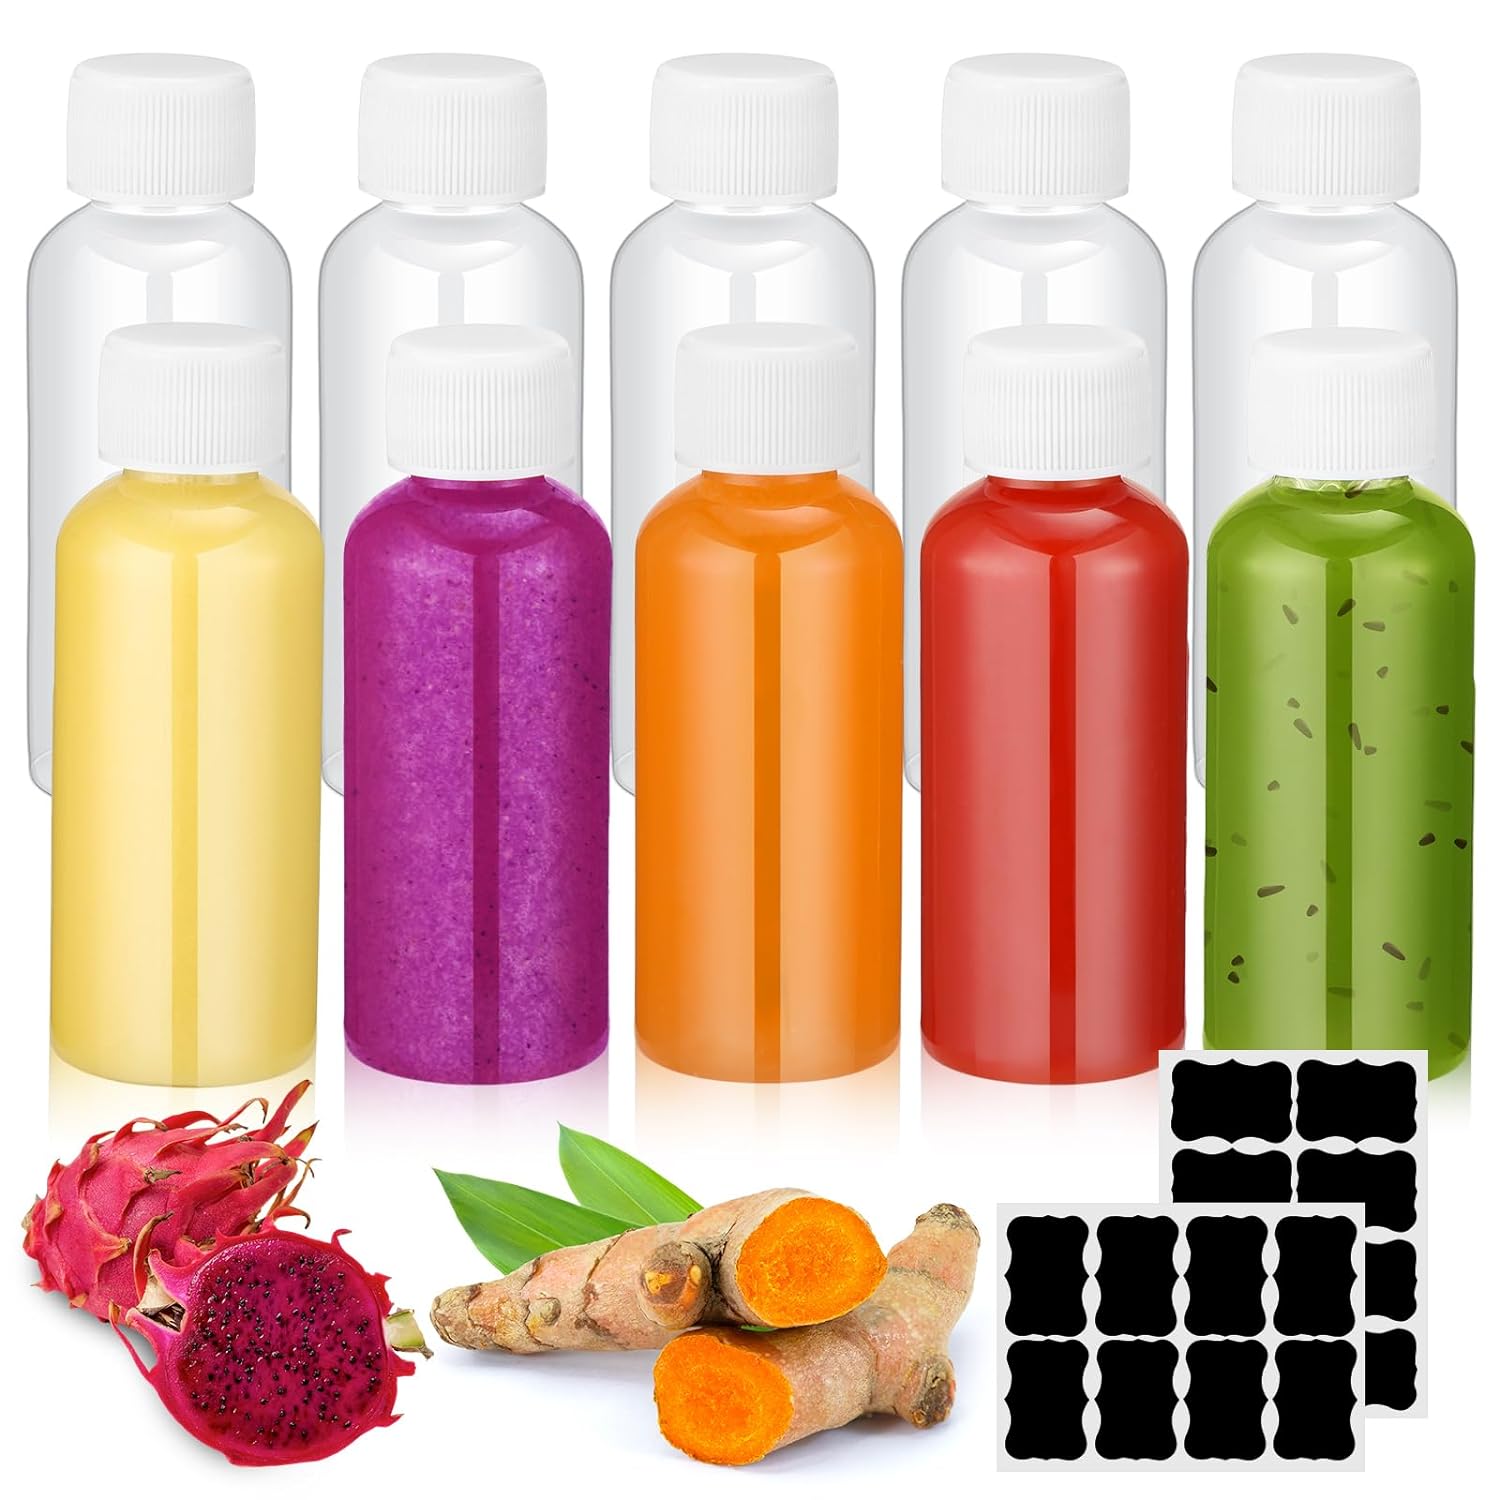 Great Choice Products 10 Pcs 1Oz Shot Bottles With Caps Ginger Shots  Bottles Wellness Shot Bottles Juice Shot Bottles Small Plastic Bottles For